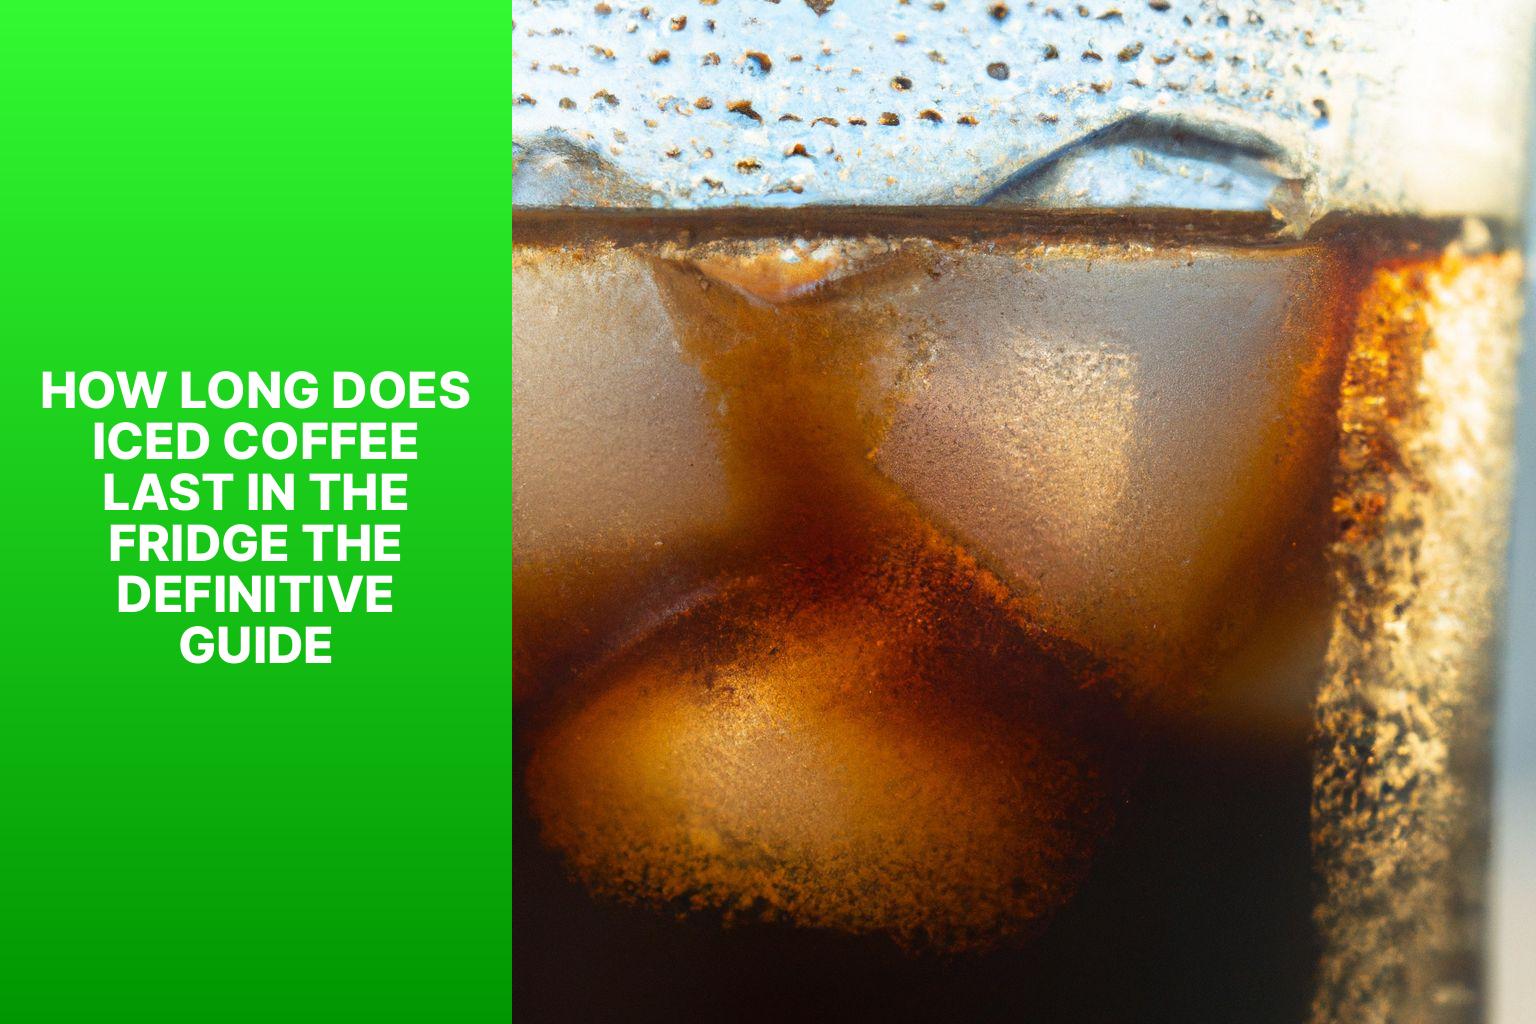 How Long Does Iced Coffee Last in the Fridge? The Definitive Guide